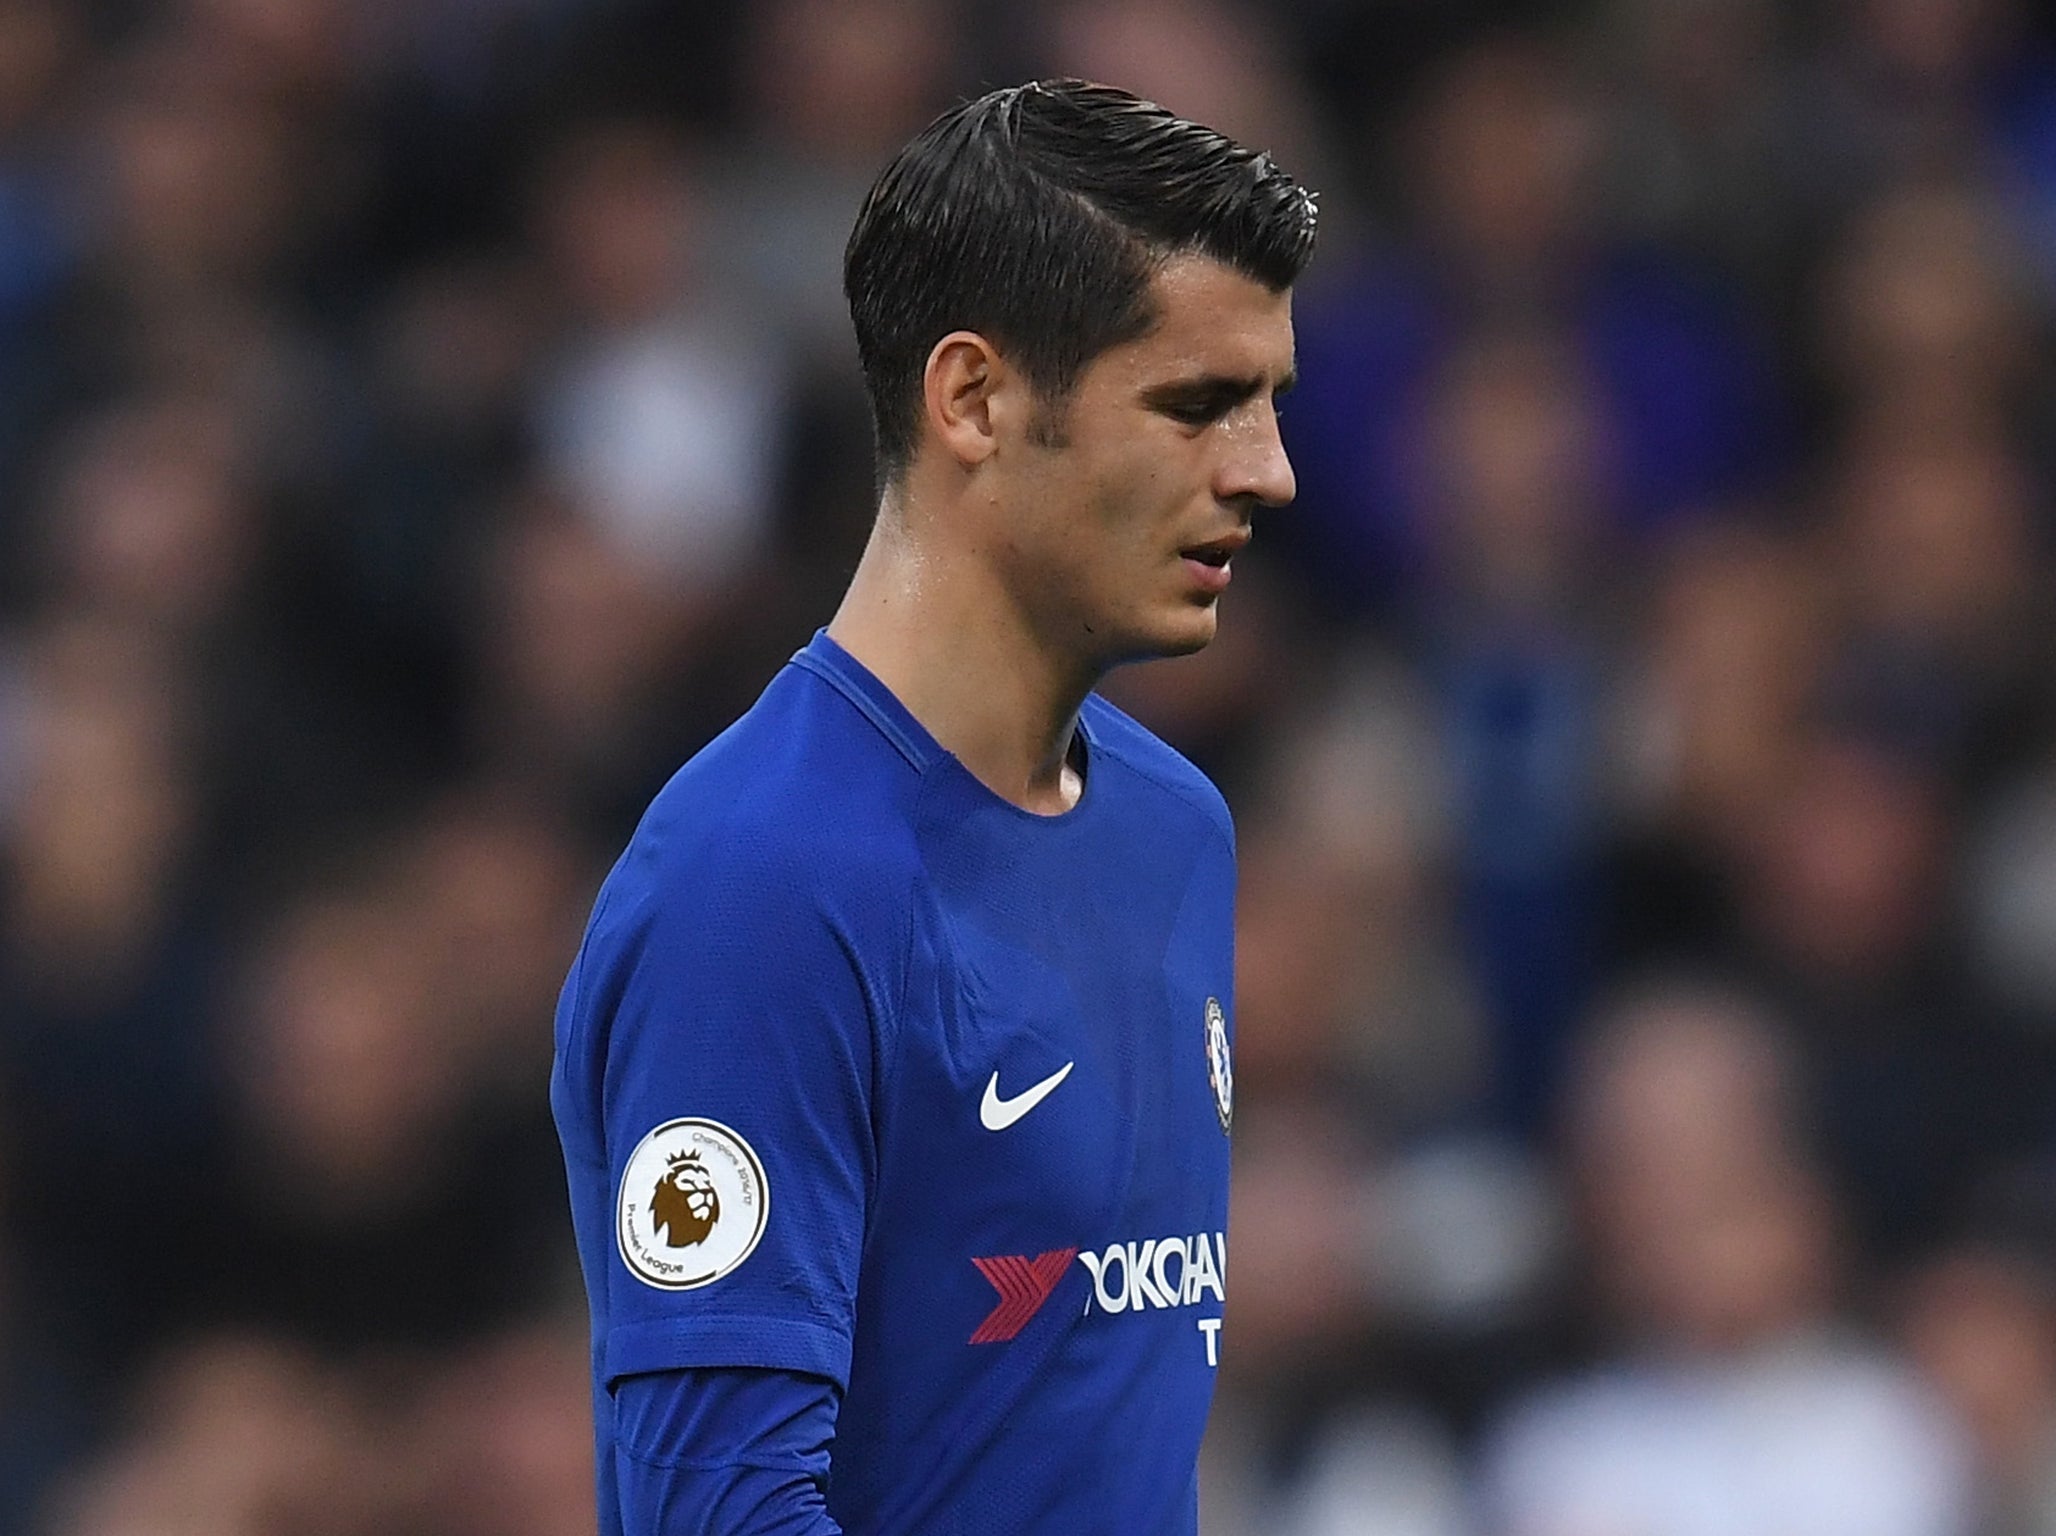 Morata could miss several important matches